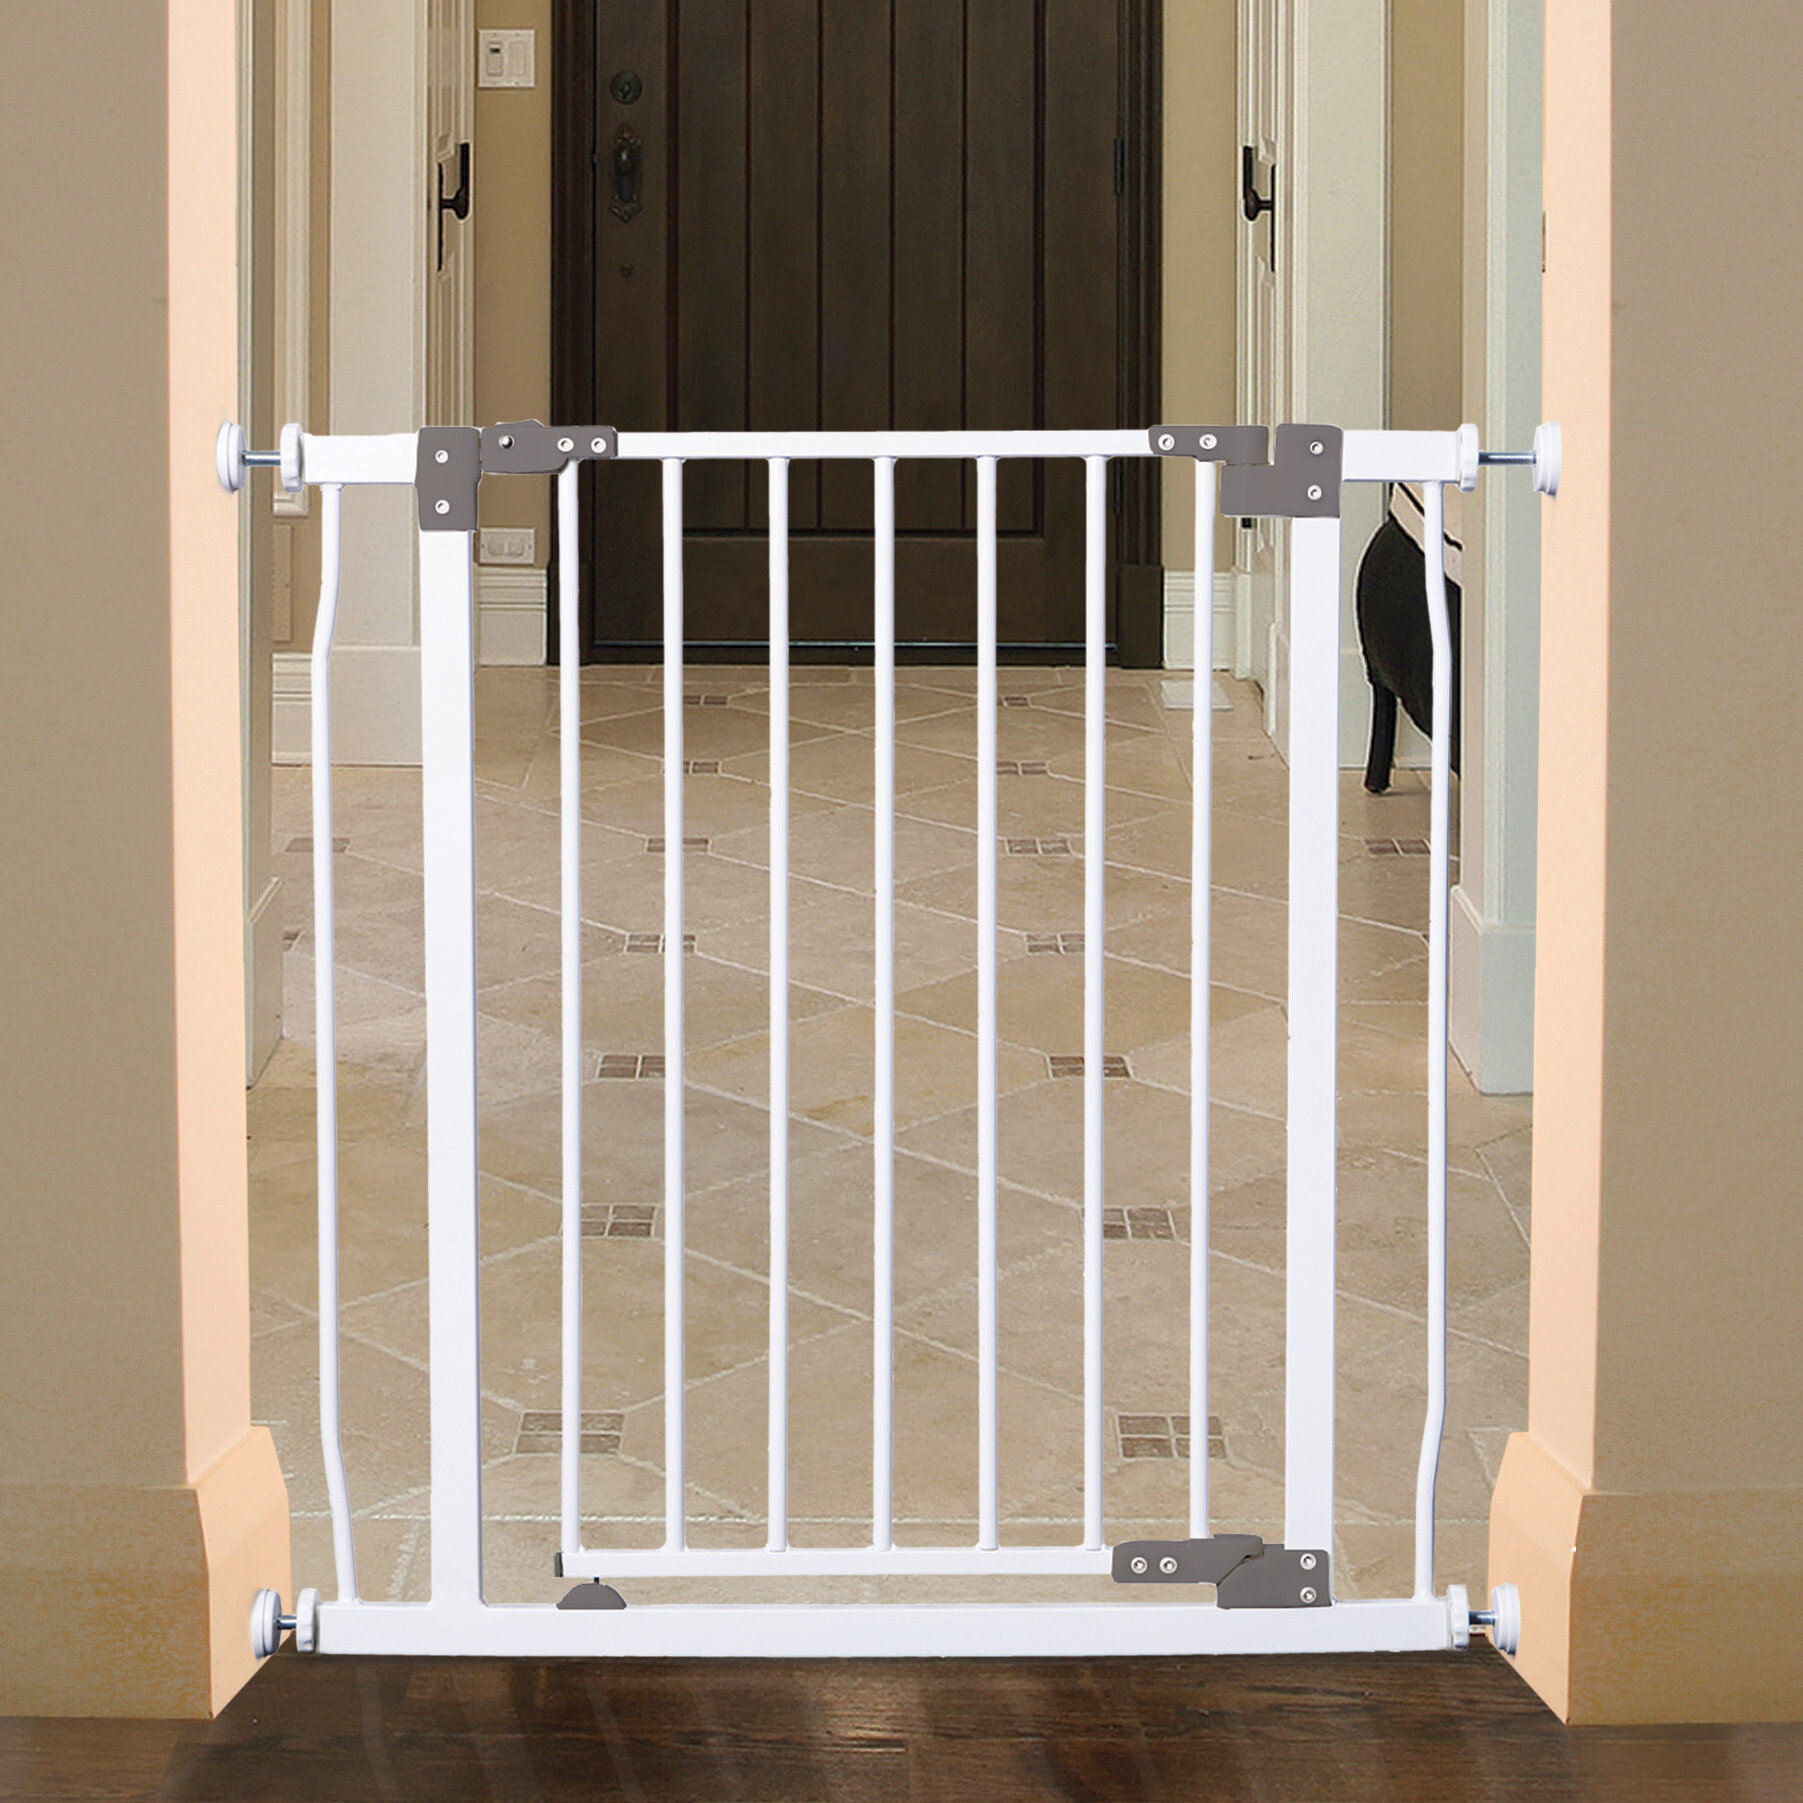 baby gate that allows door to close